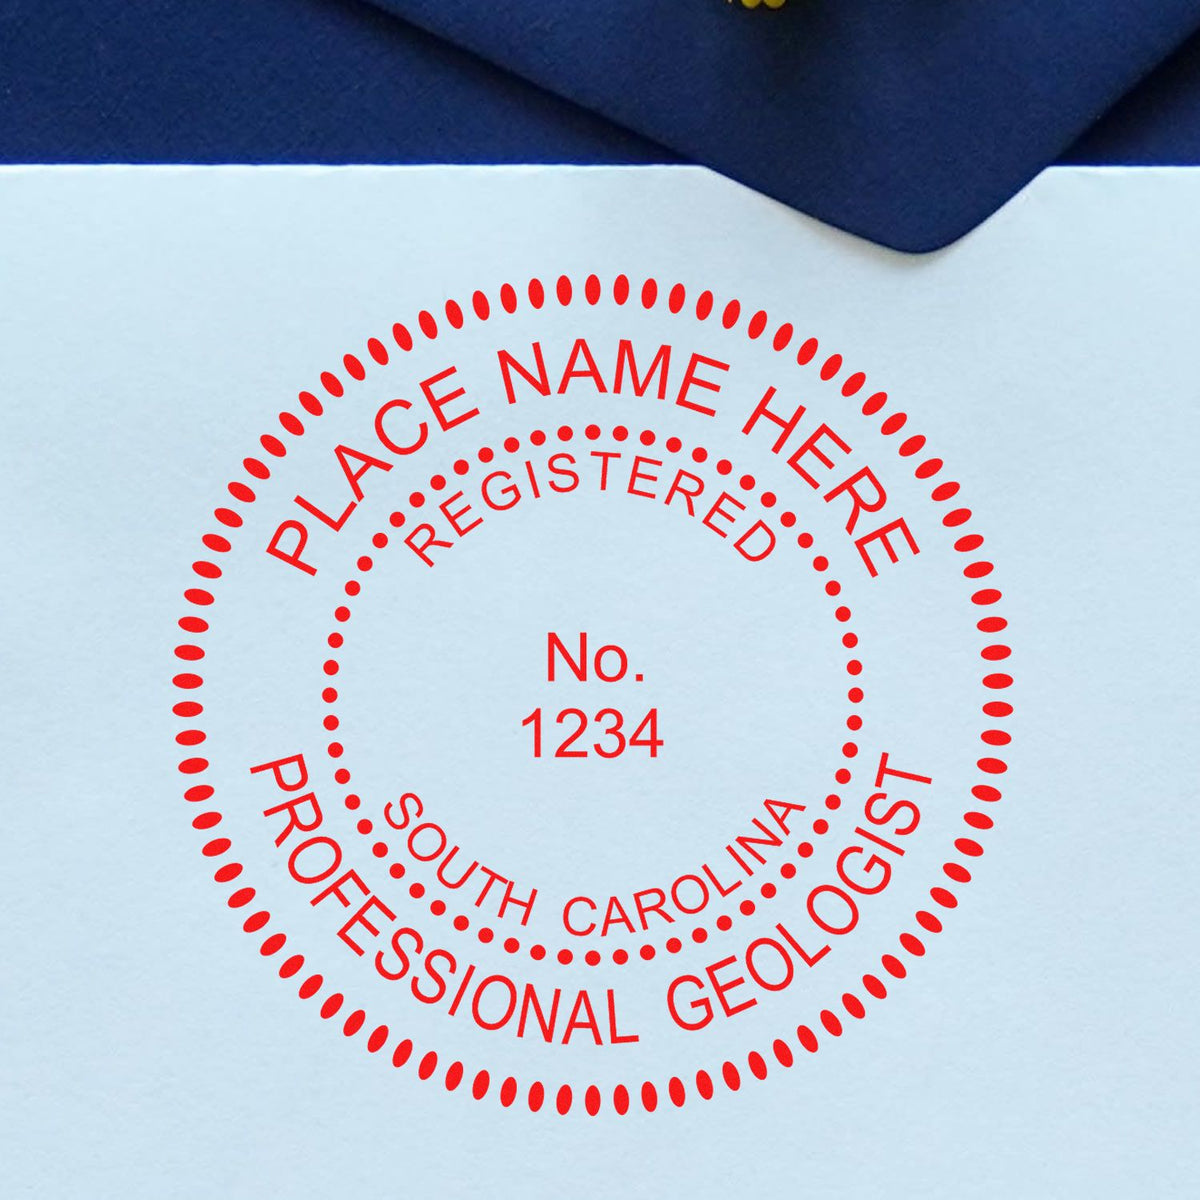 An in use photo of the Slim Pre-Inked South Carolina Professional Geologist Seal Stamp showing a sample imprint on a cardstock